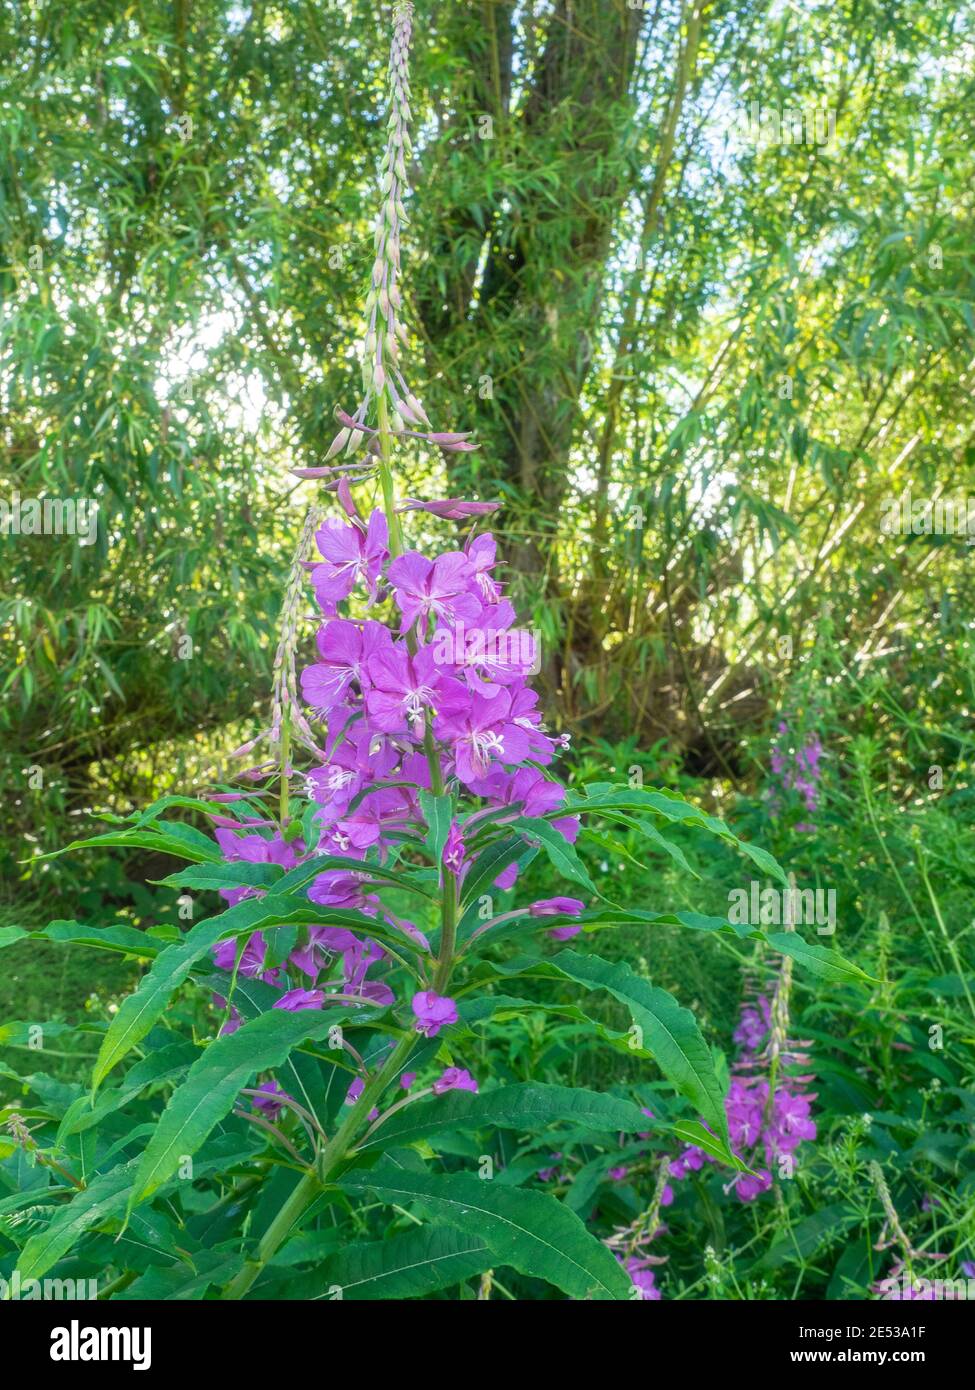 Purple loosestrife (Lythrum salicaria) is a flowering plant belonging to the family Lythraceae. It should not be confused with other plants sharing th Stock Photo